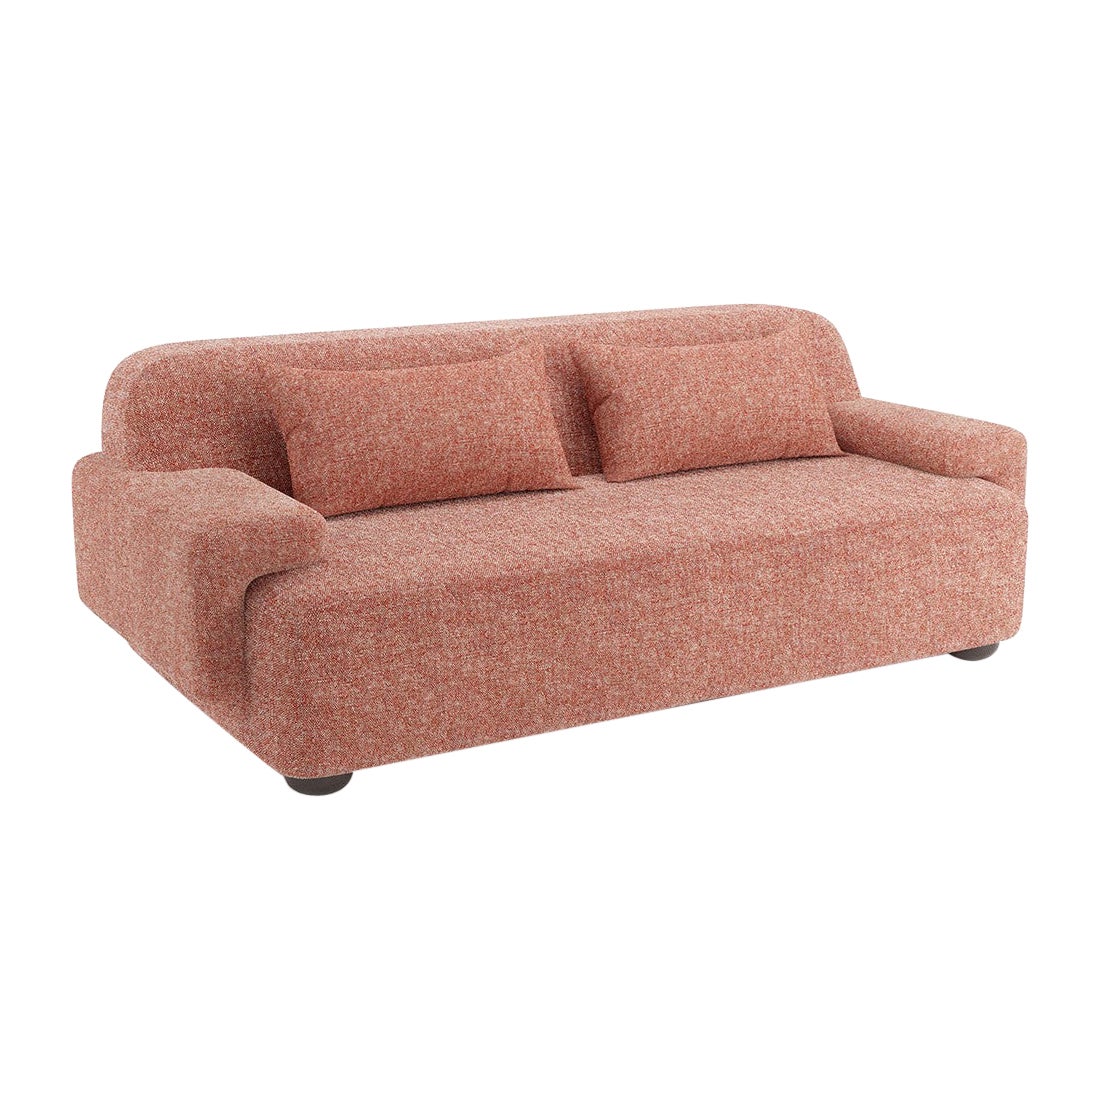 Popus Editions Lena 2.5 Seater Sofa in Marrakesh London Linen Fabric For Sale